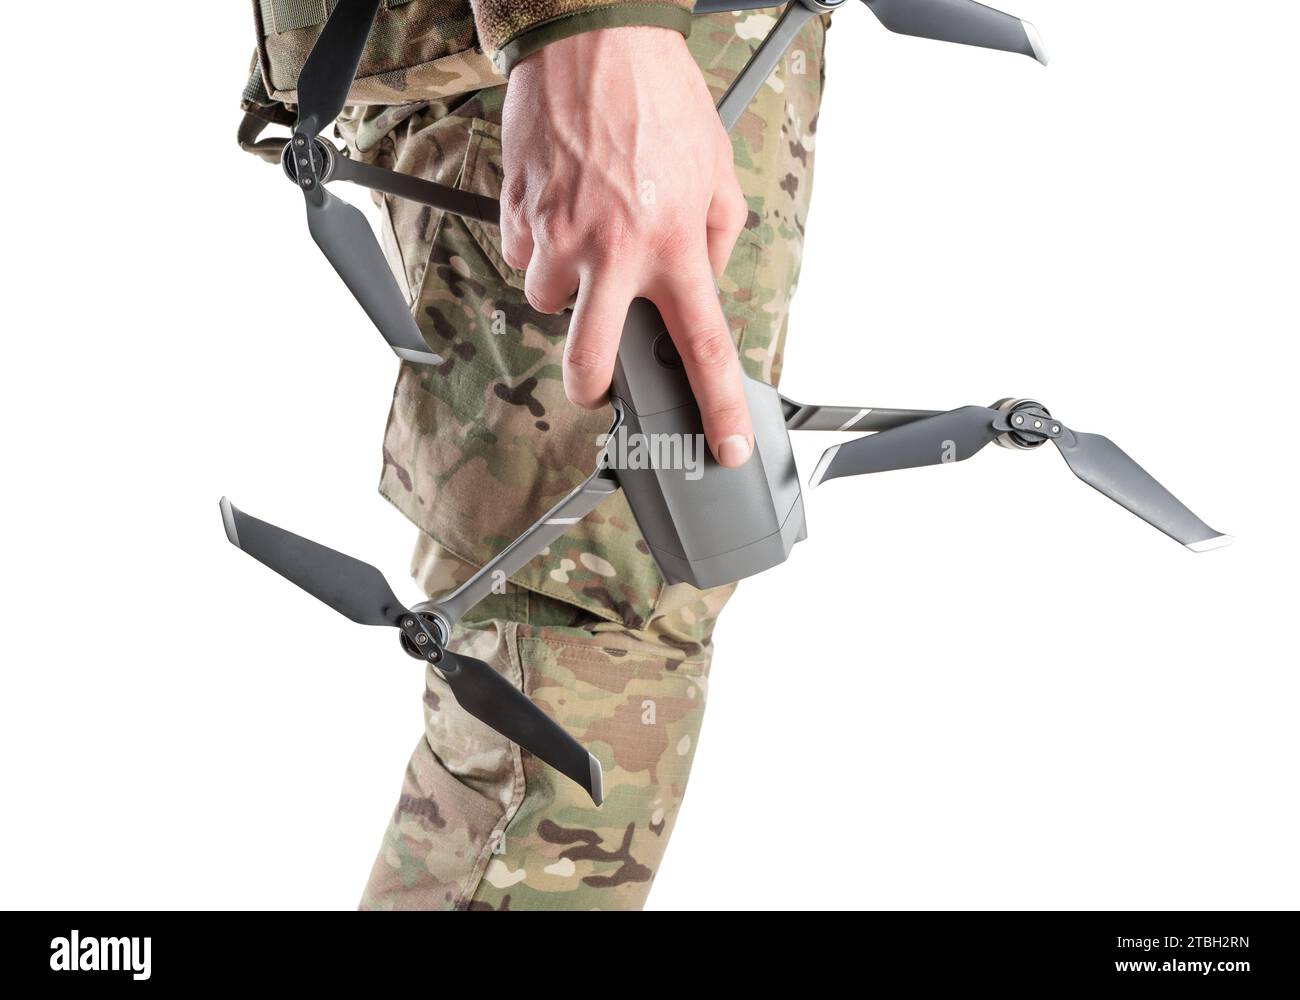 Drone in hand of military soldier in camouflage uniform. Side view on a white background. Concept of drones in modern war. Stock Photo